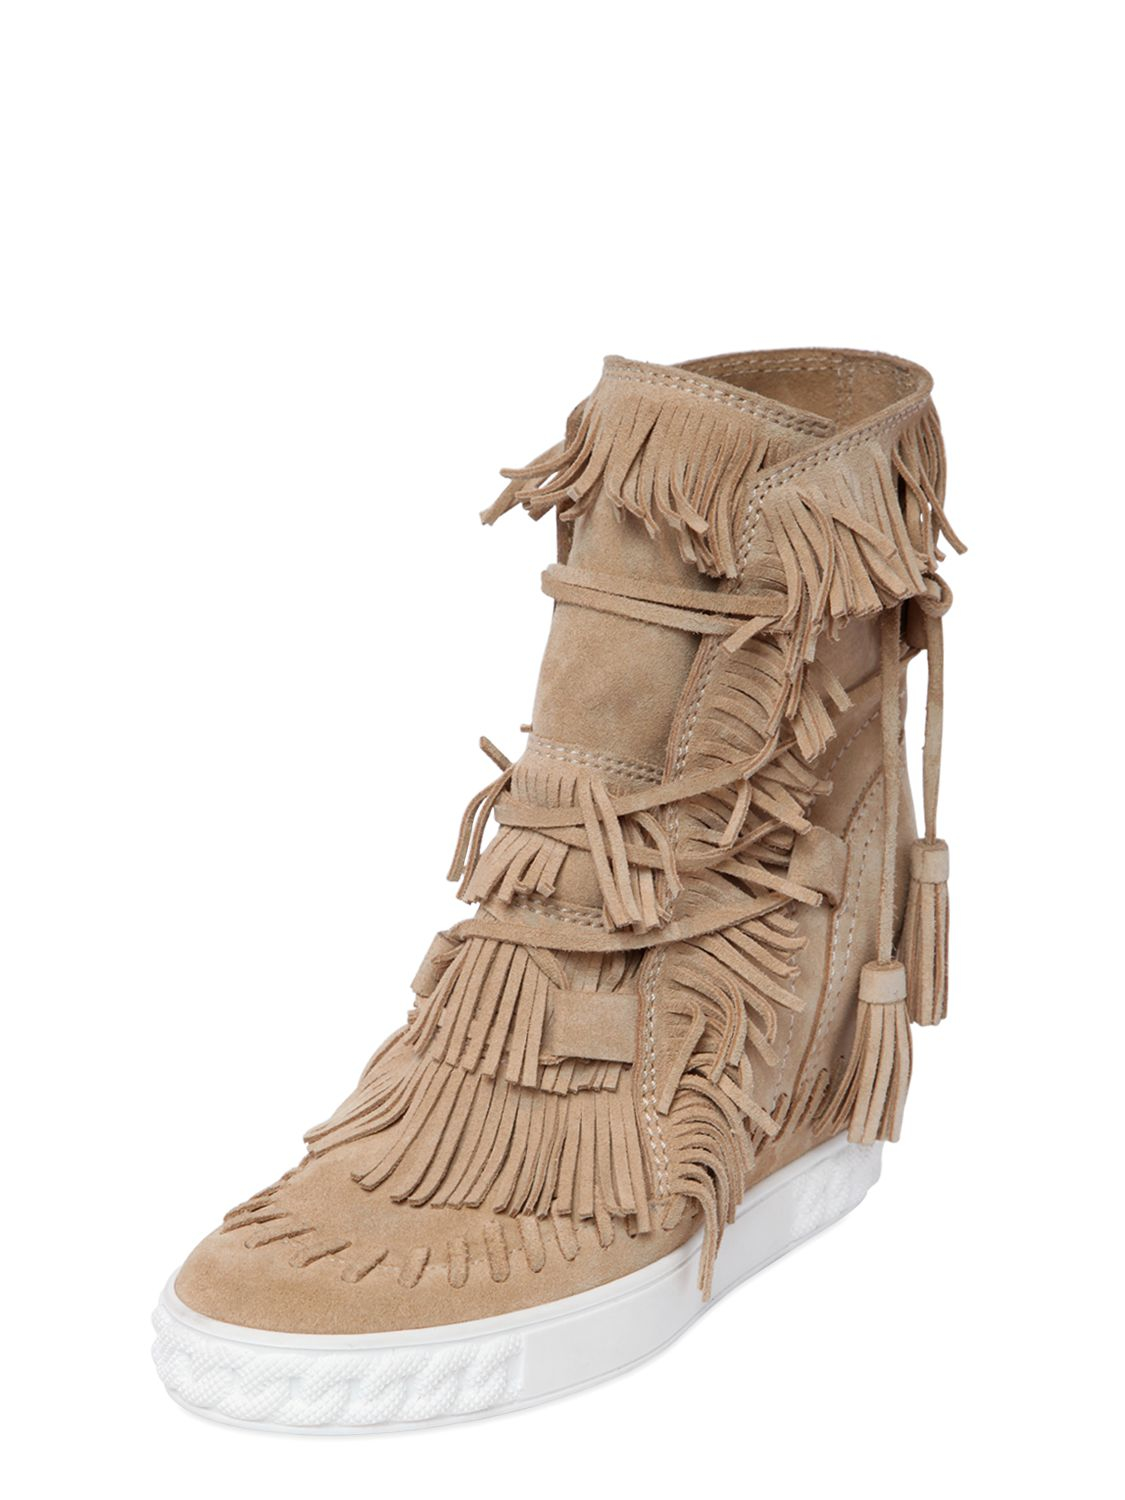 Casadei 80mm Fringe Suede Wedge Boots in Natural - Lyst